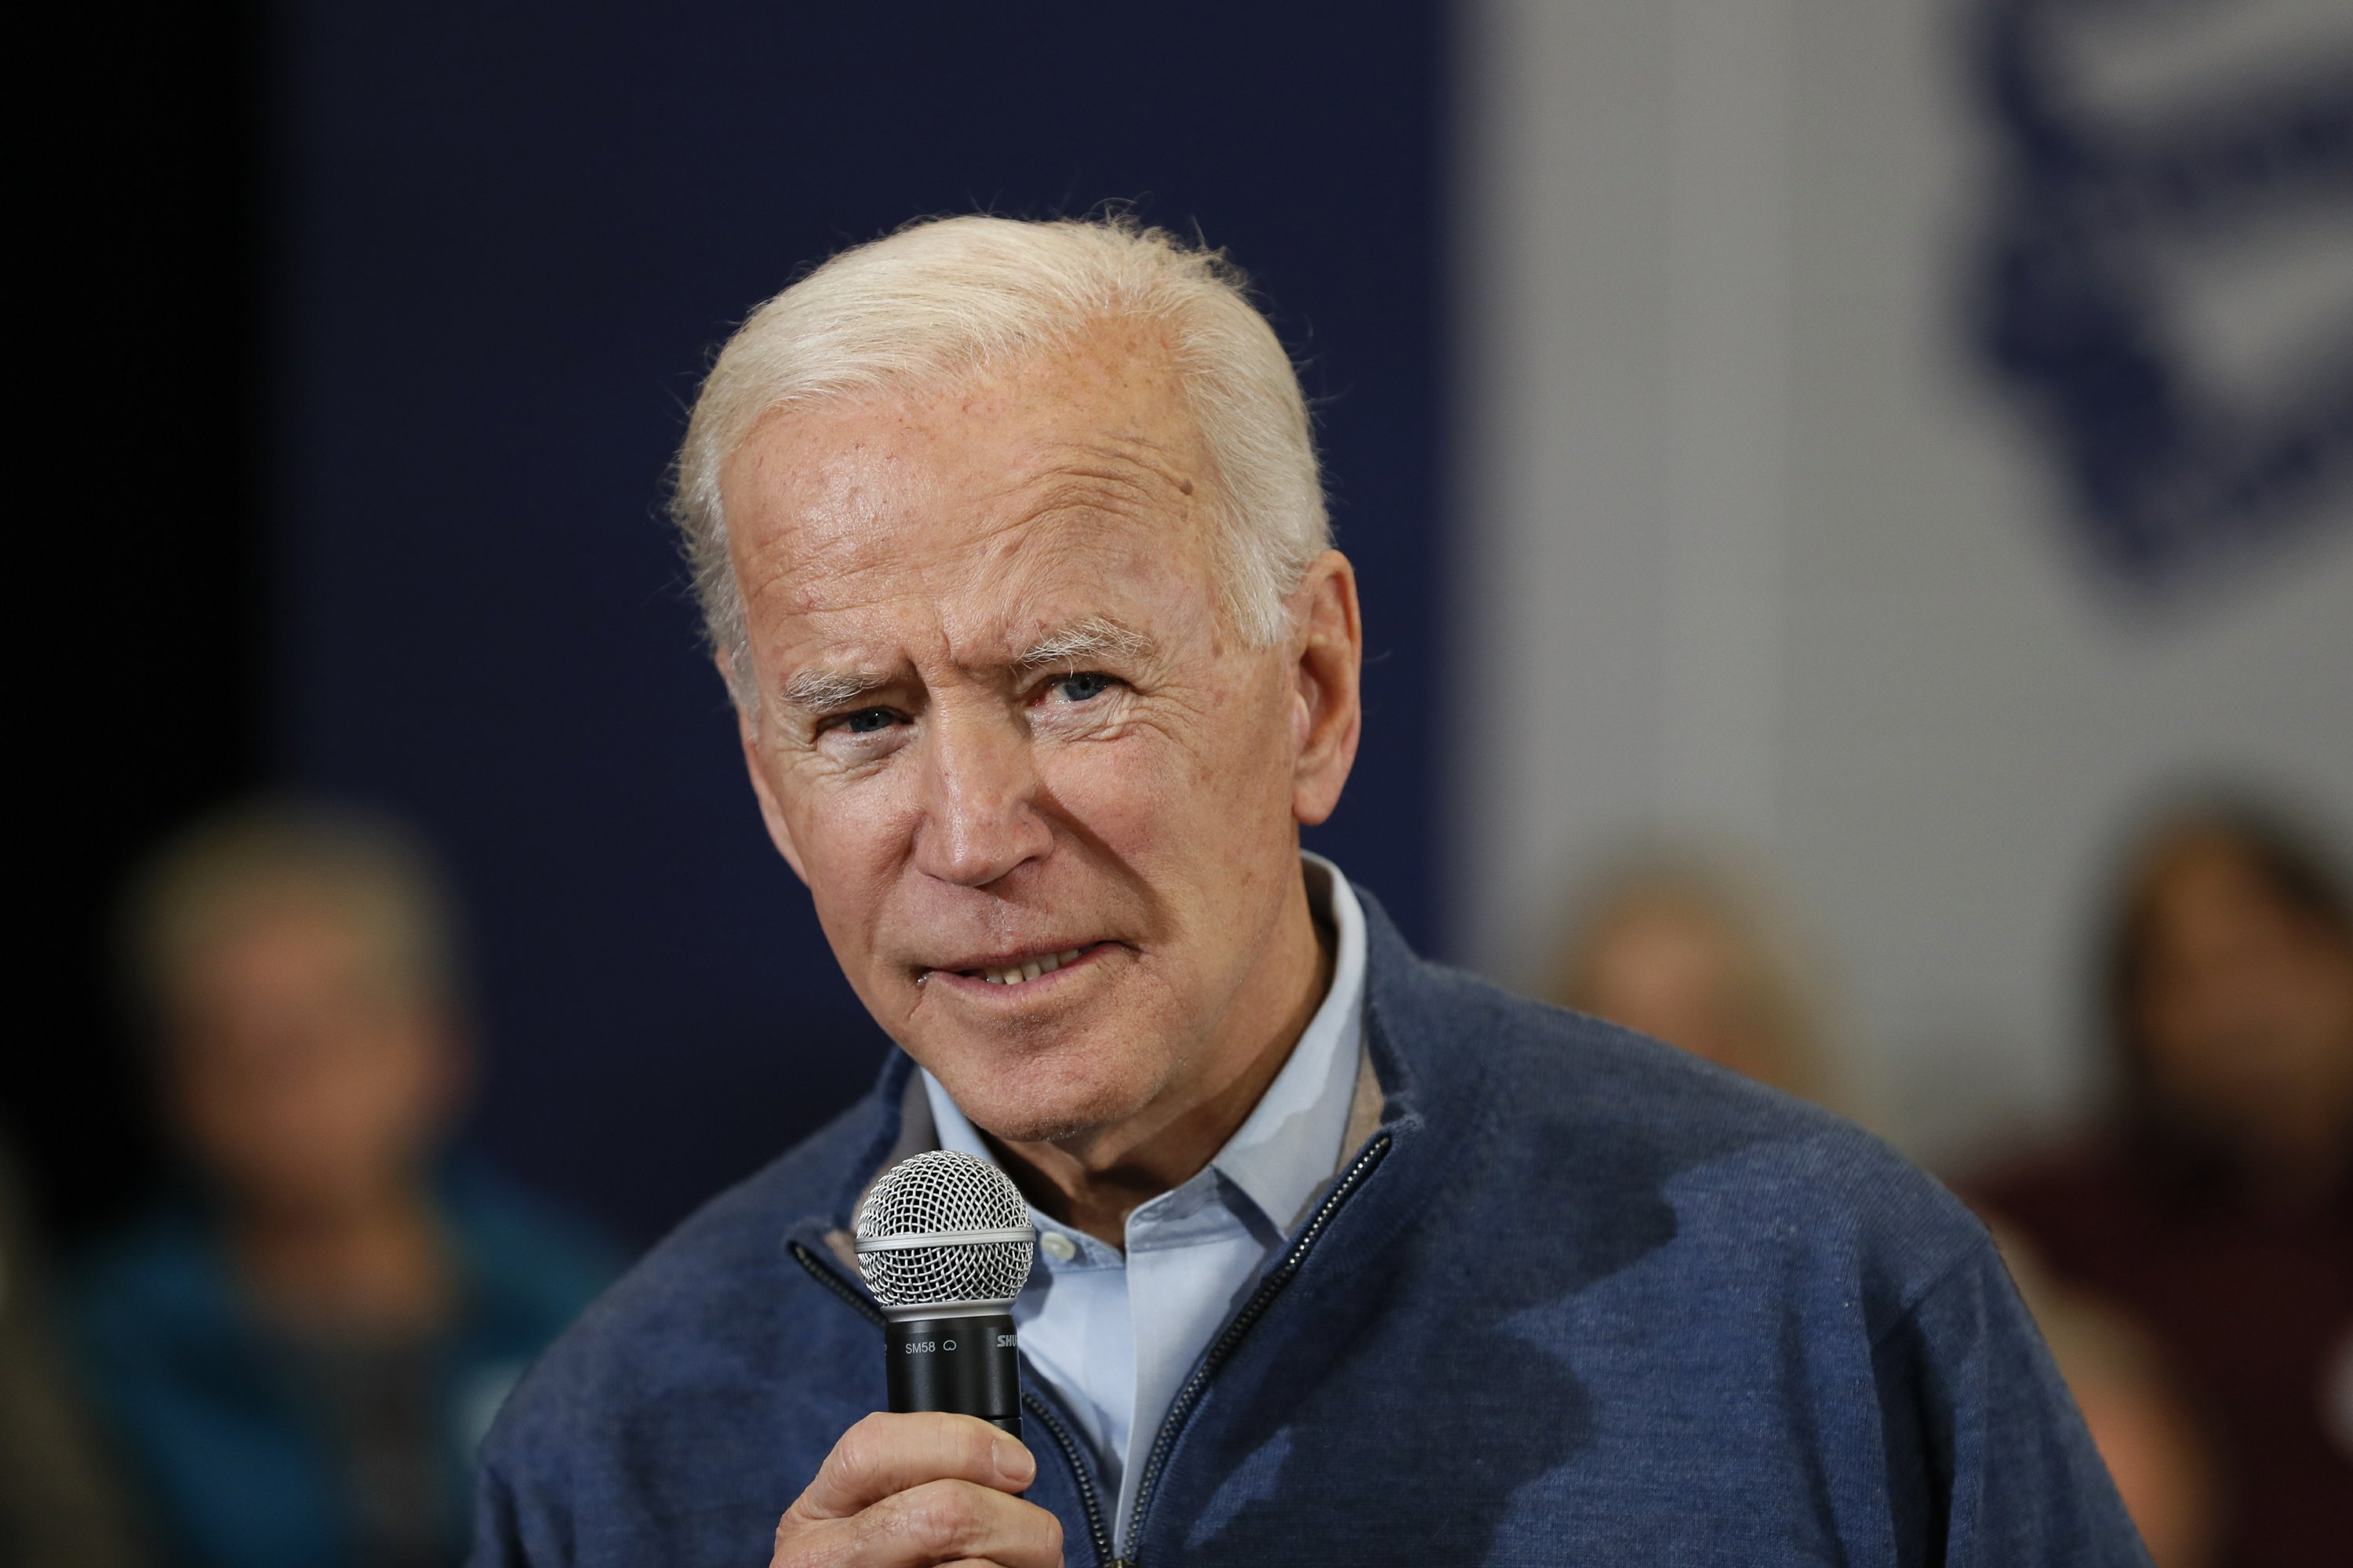 former-iowa-governor-says-biden-has-heart-of-a-president-ap-news